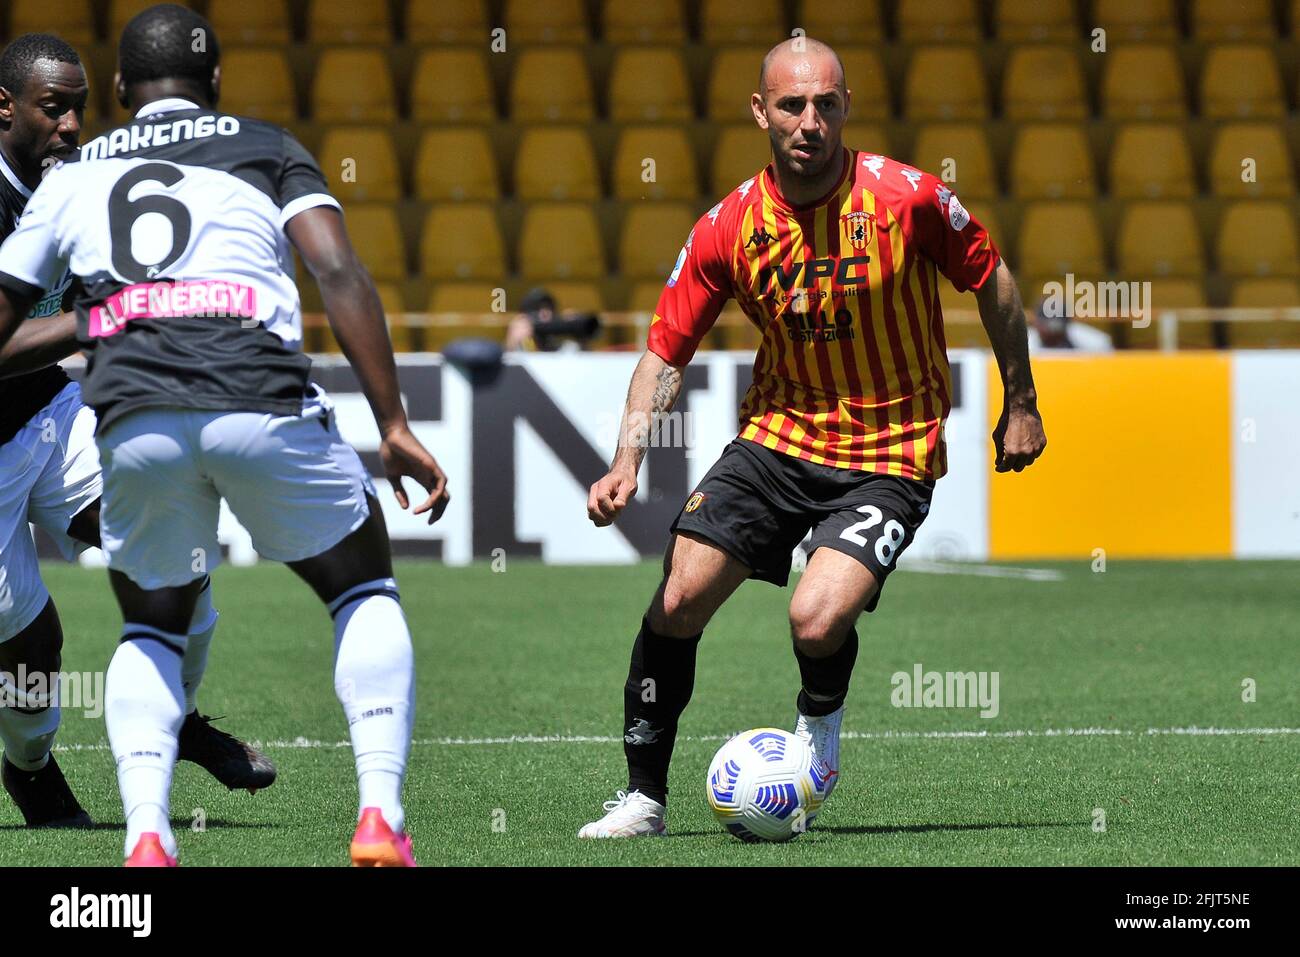 Pasquale Schiattarella player of Benevento, during the match of the Italian football league Serie A between Benevento vs Udinese final result 2-4, mat Stock Photo